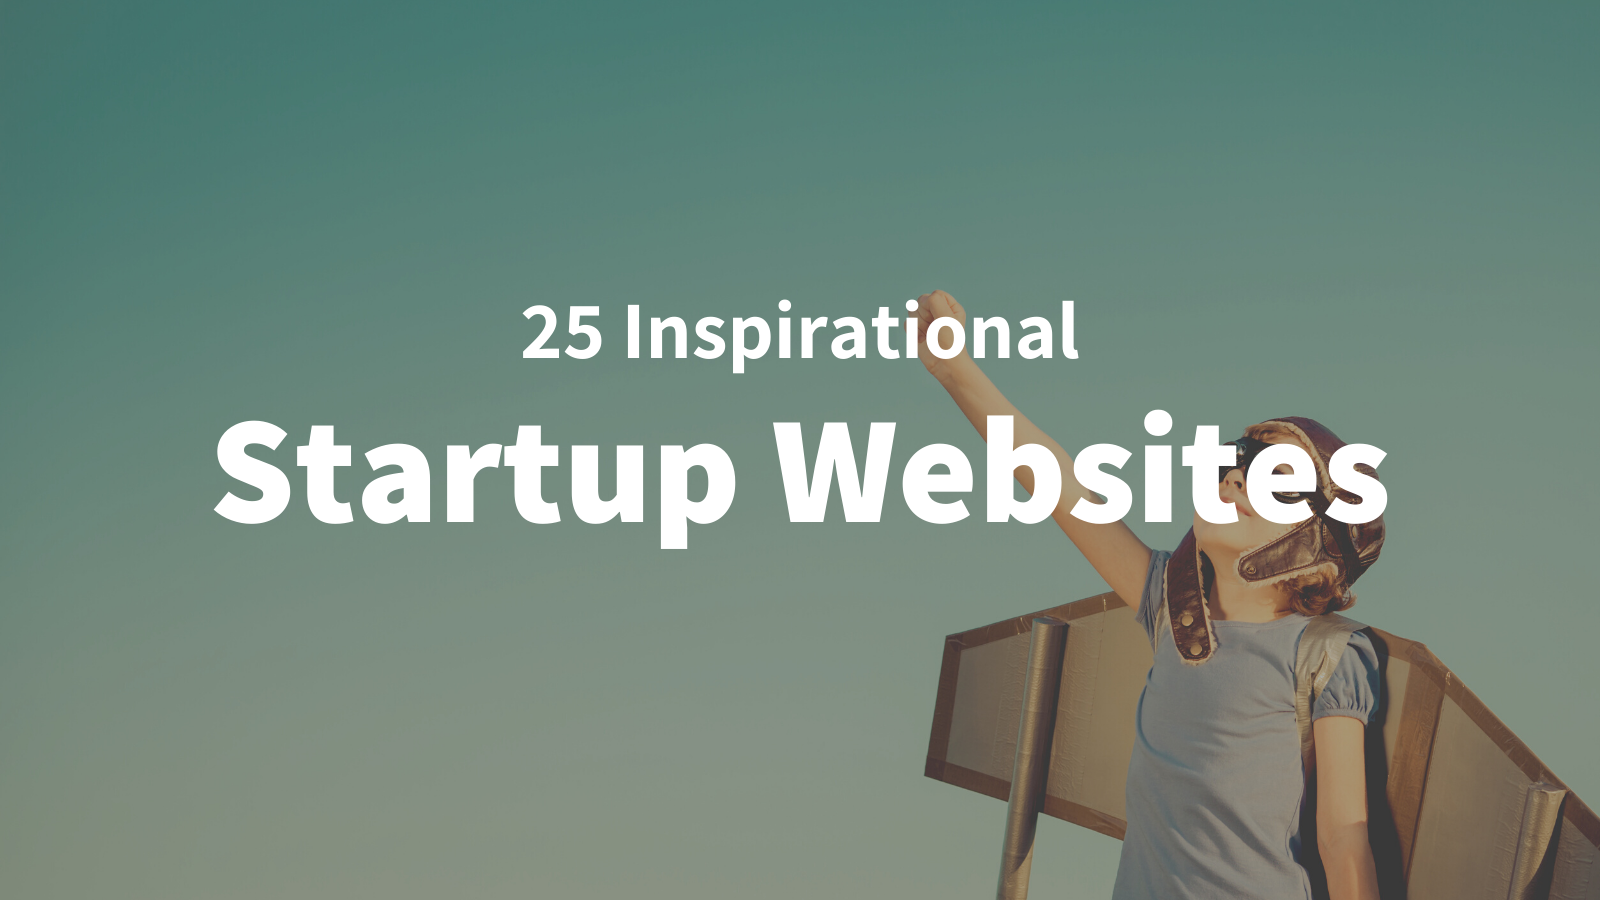 The Startup Website List: 25 Inspirational Examples